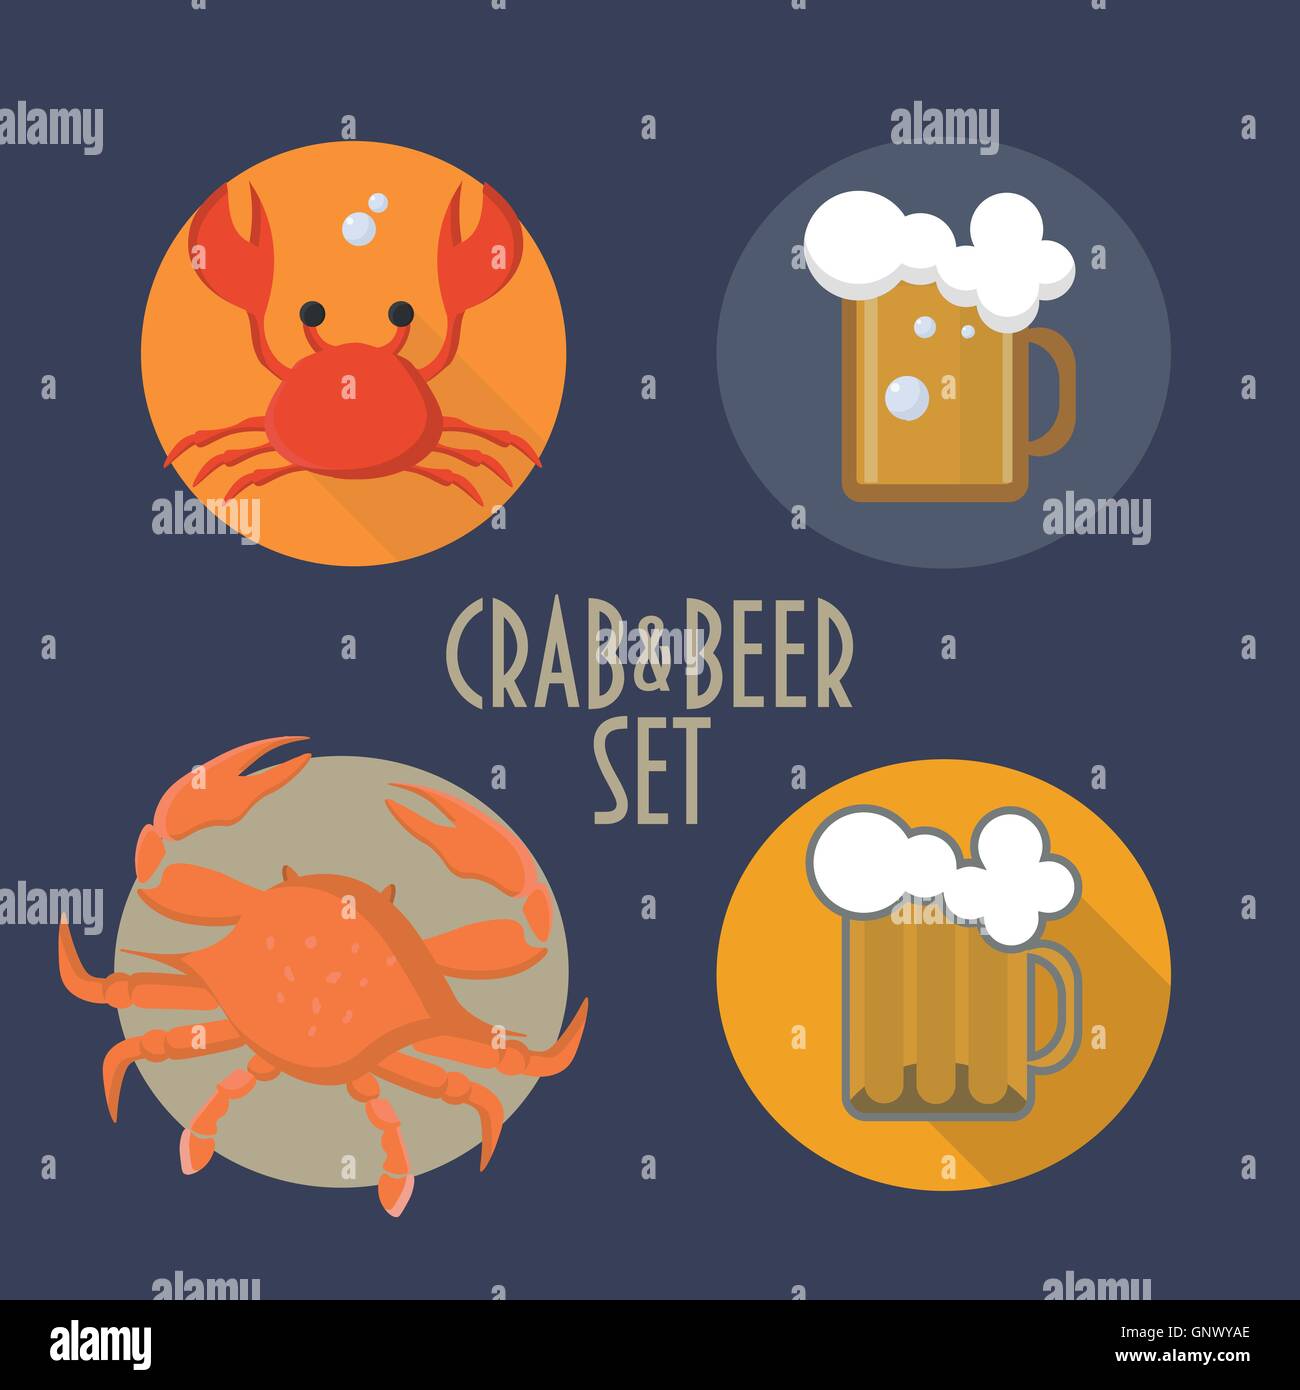 Crab and beer icons set. Crab and beer festival. Crab icon. Beer Mug